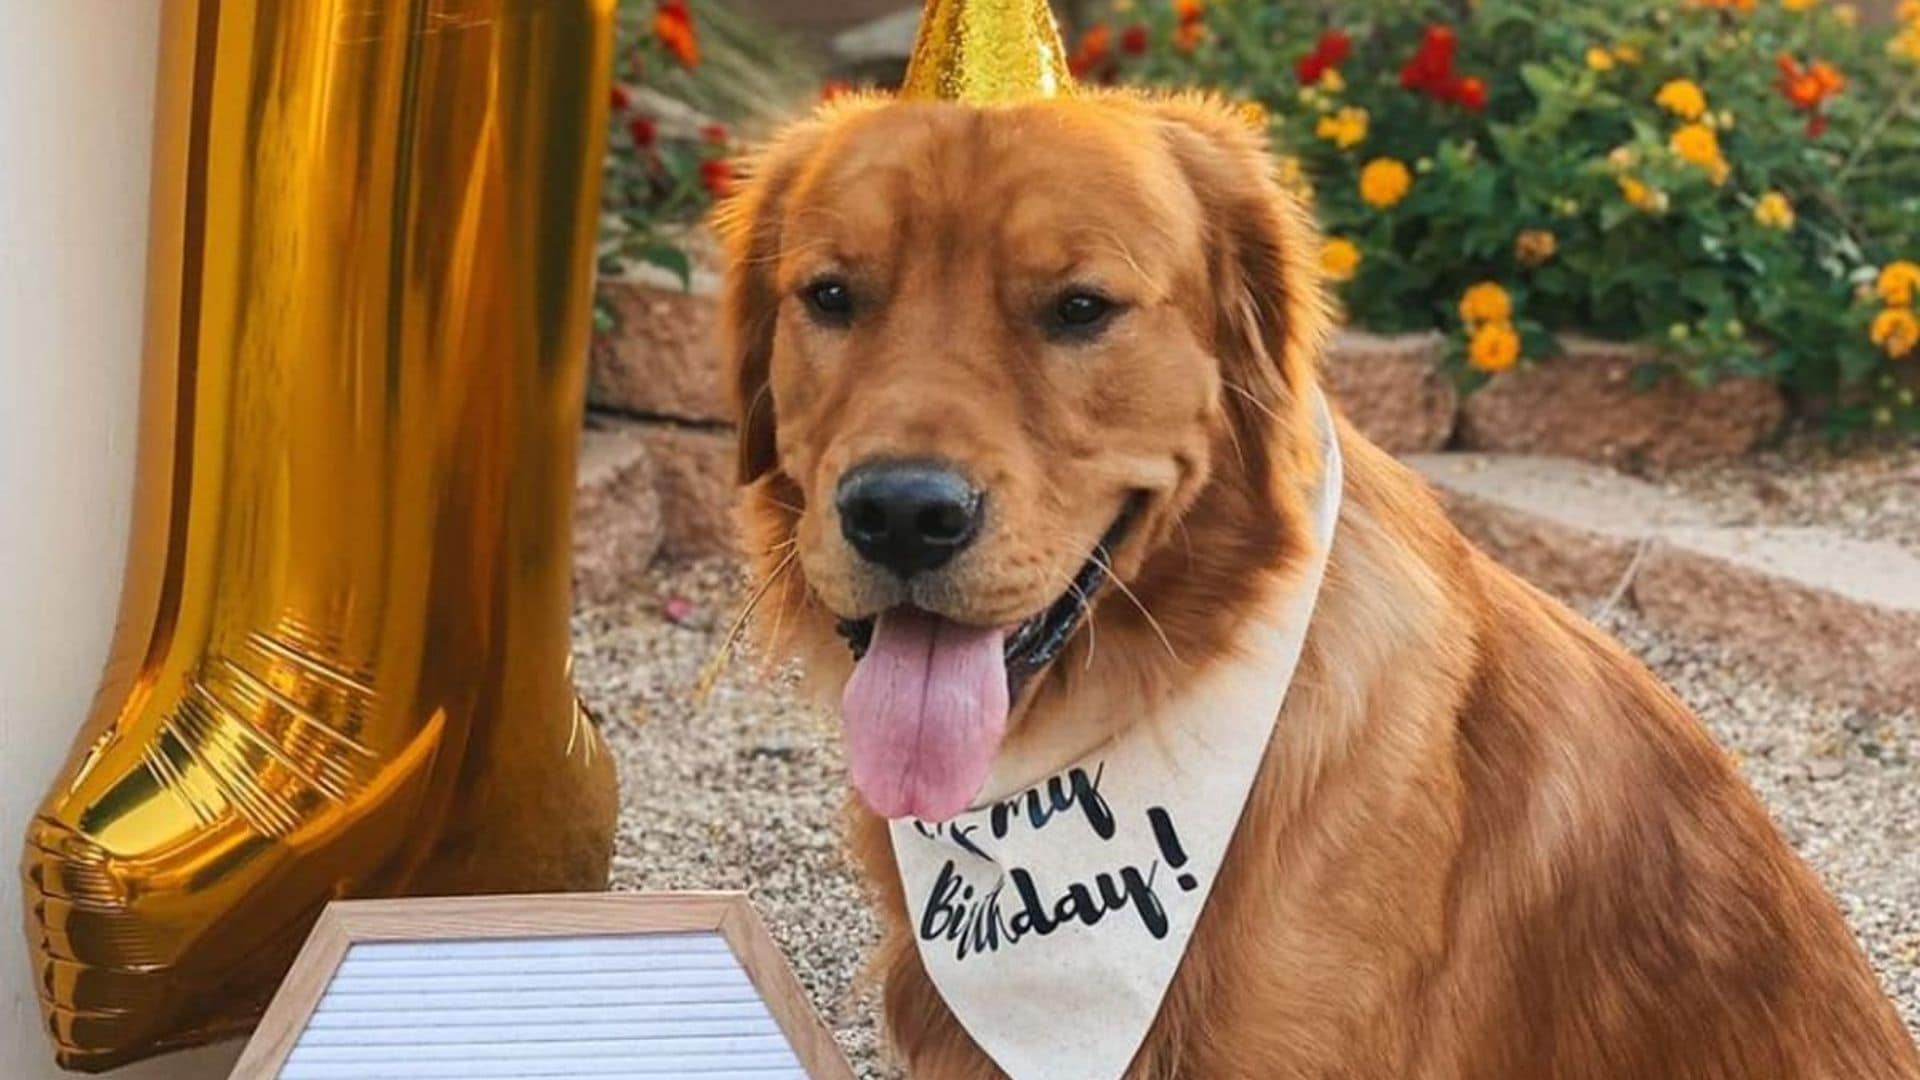 Pet of the week: This golden retriever celebrated his birthday with a pool party and 200 tennis balls